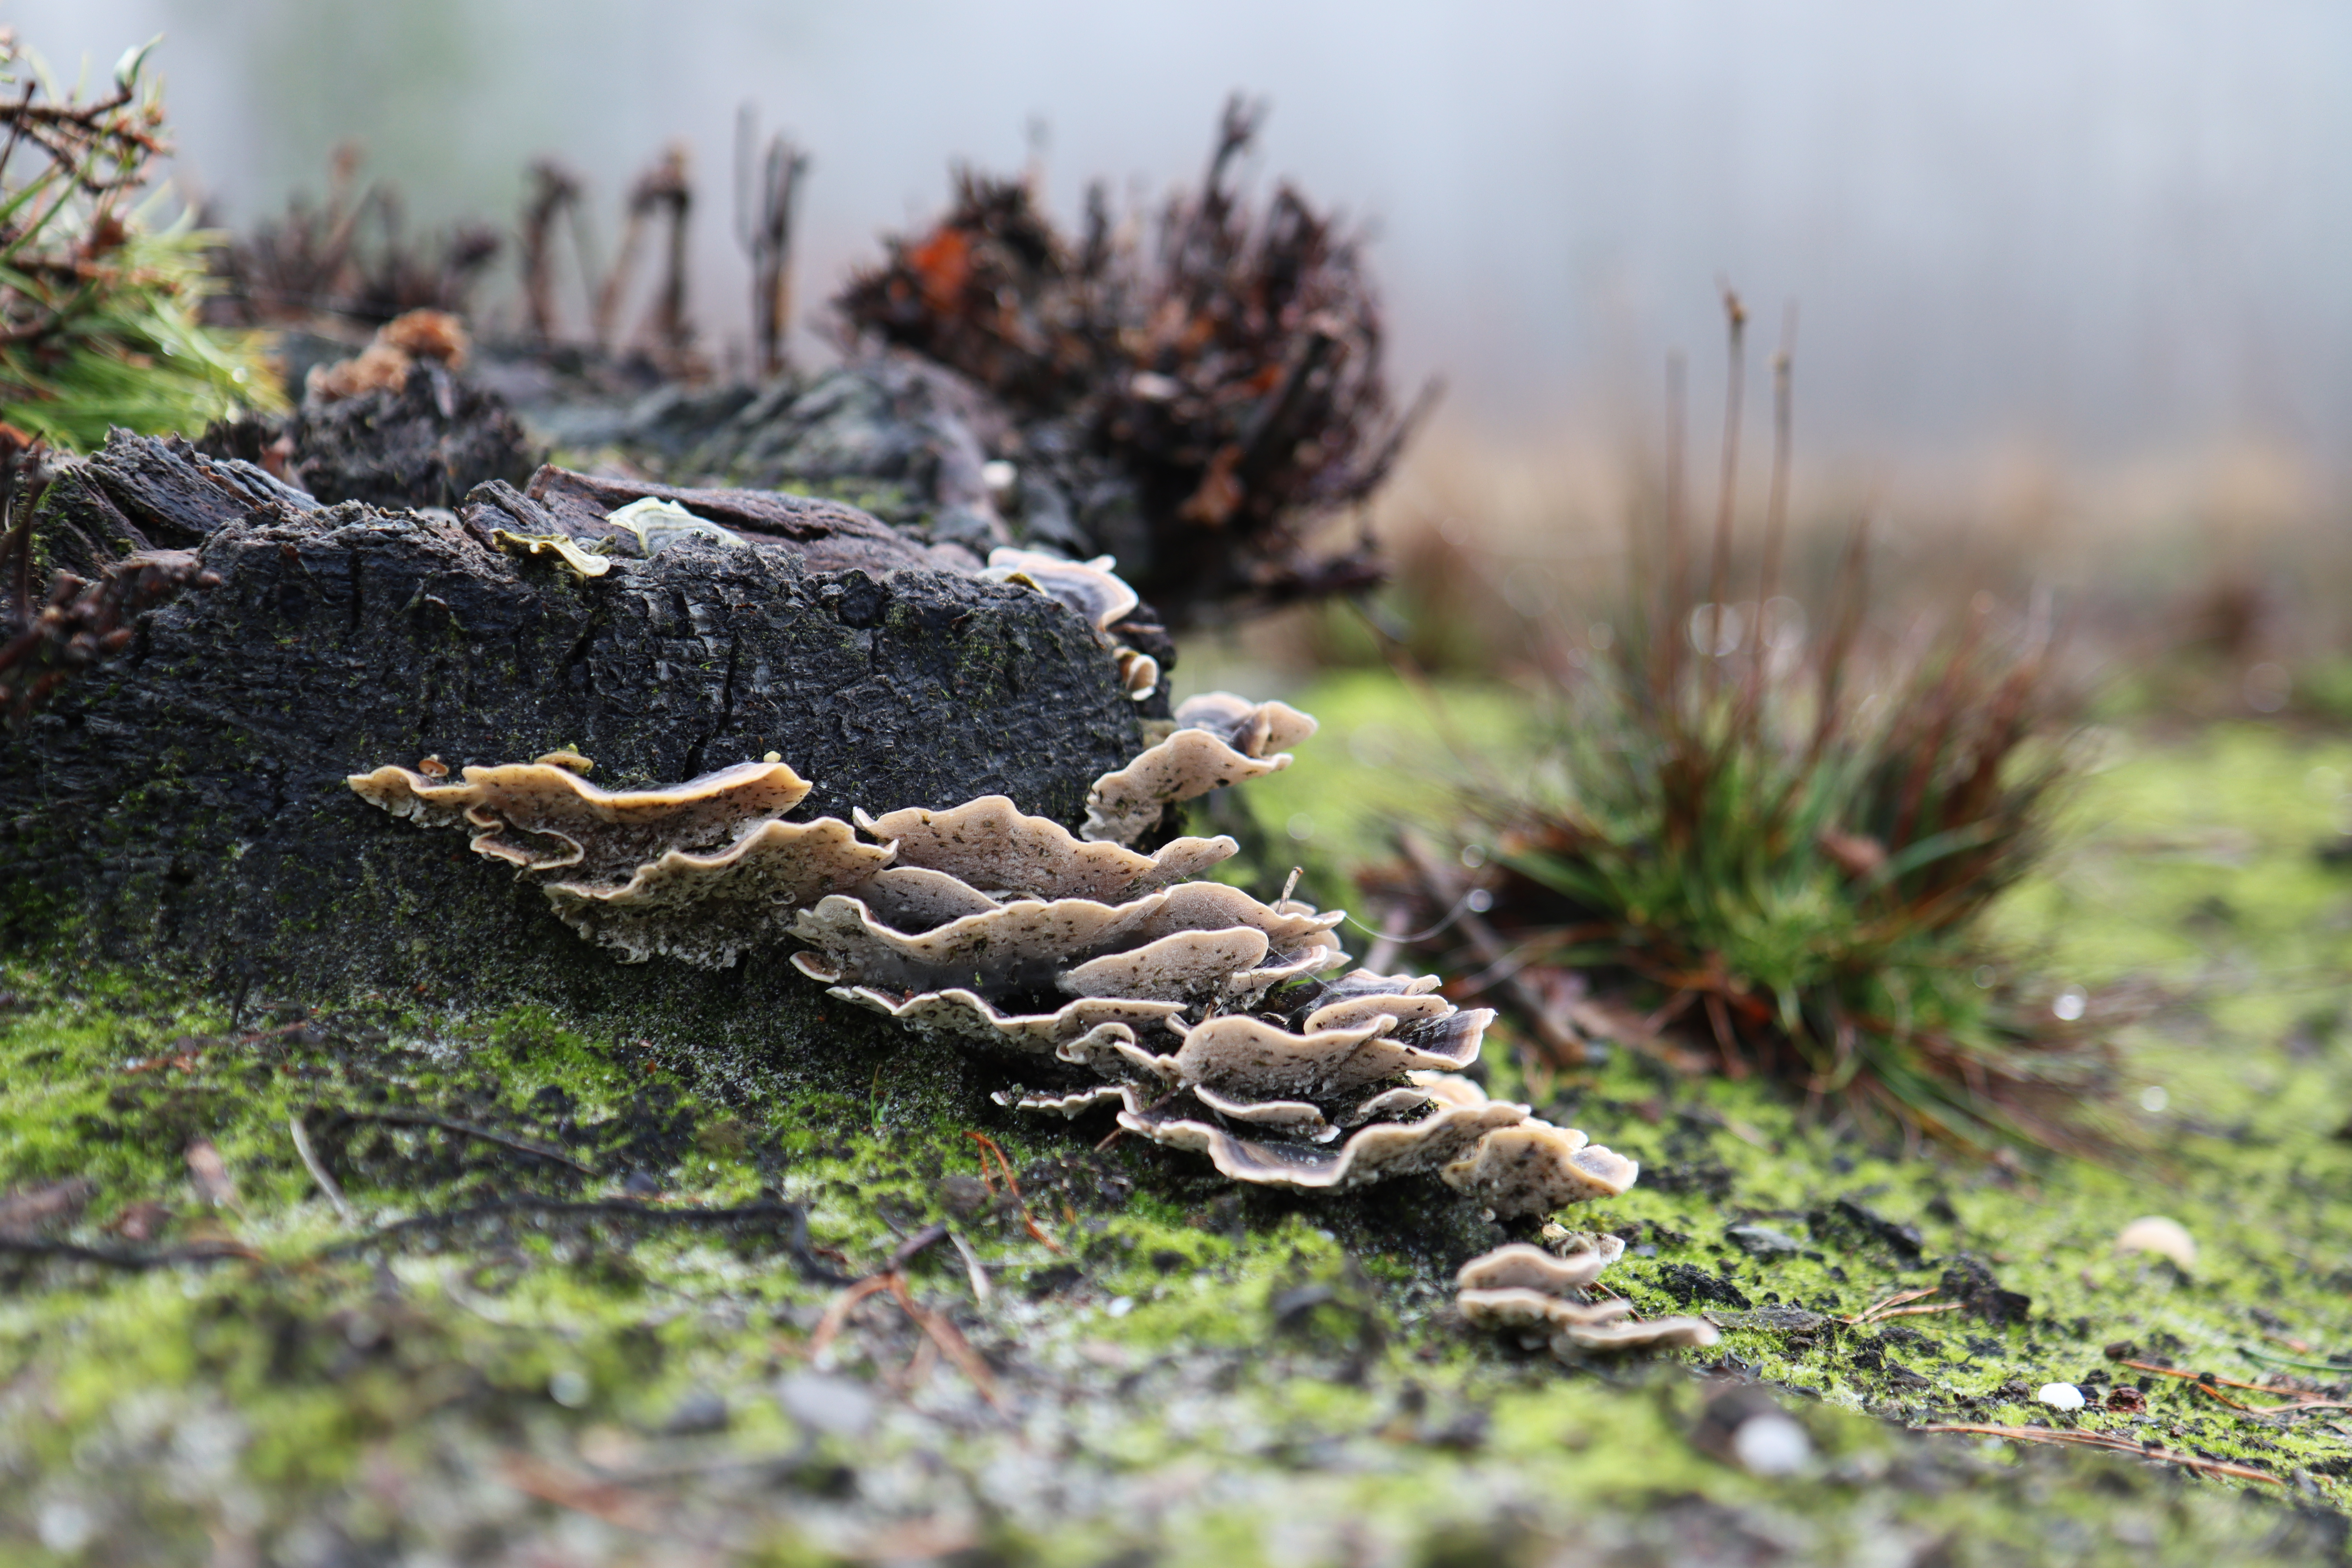 General 6960x4640 nature forest fungus closeup